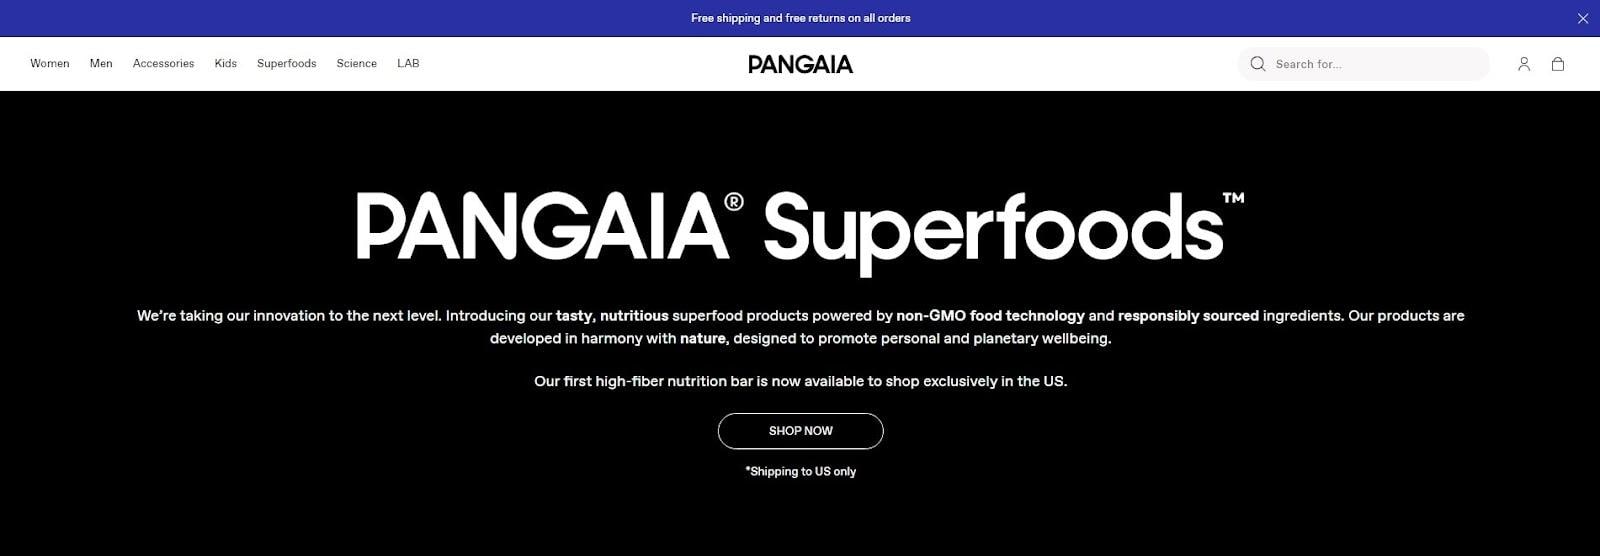 product landing page pangaia superfoods bar above the fold